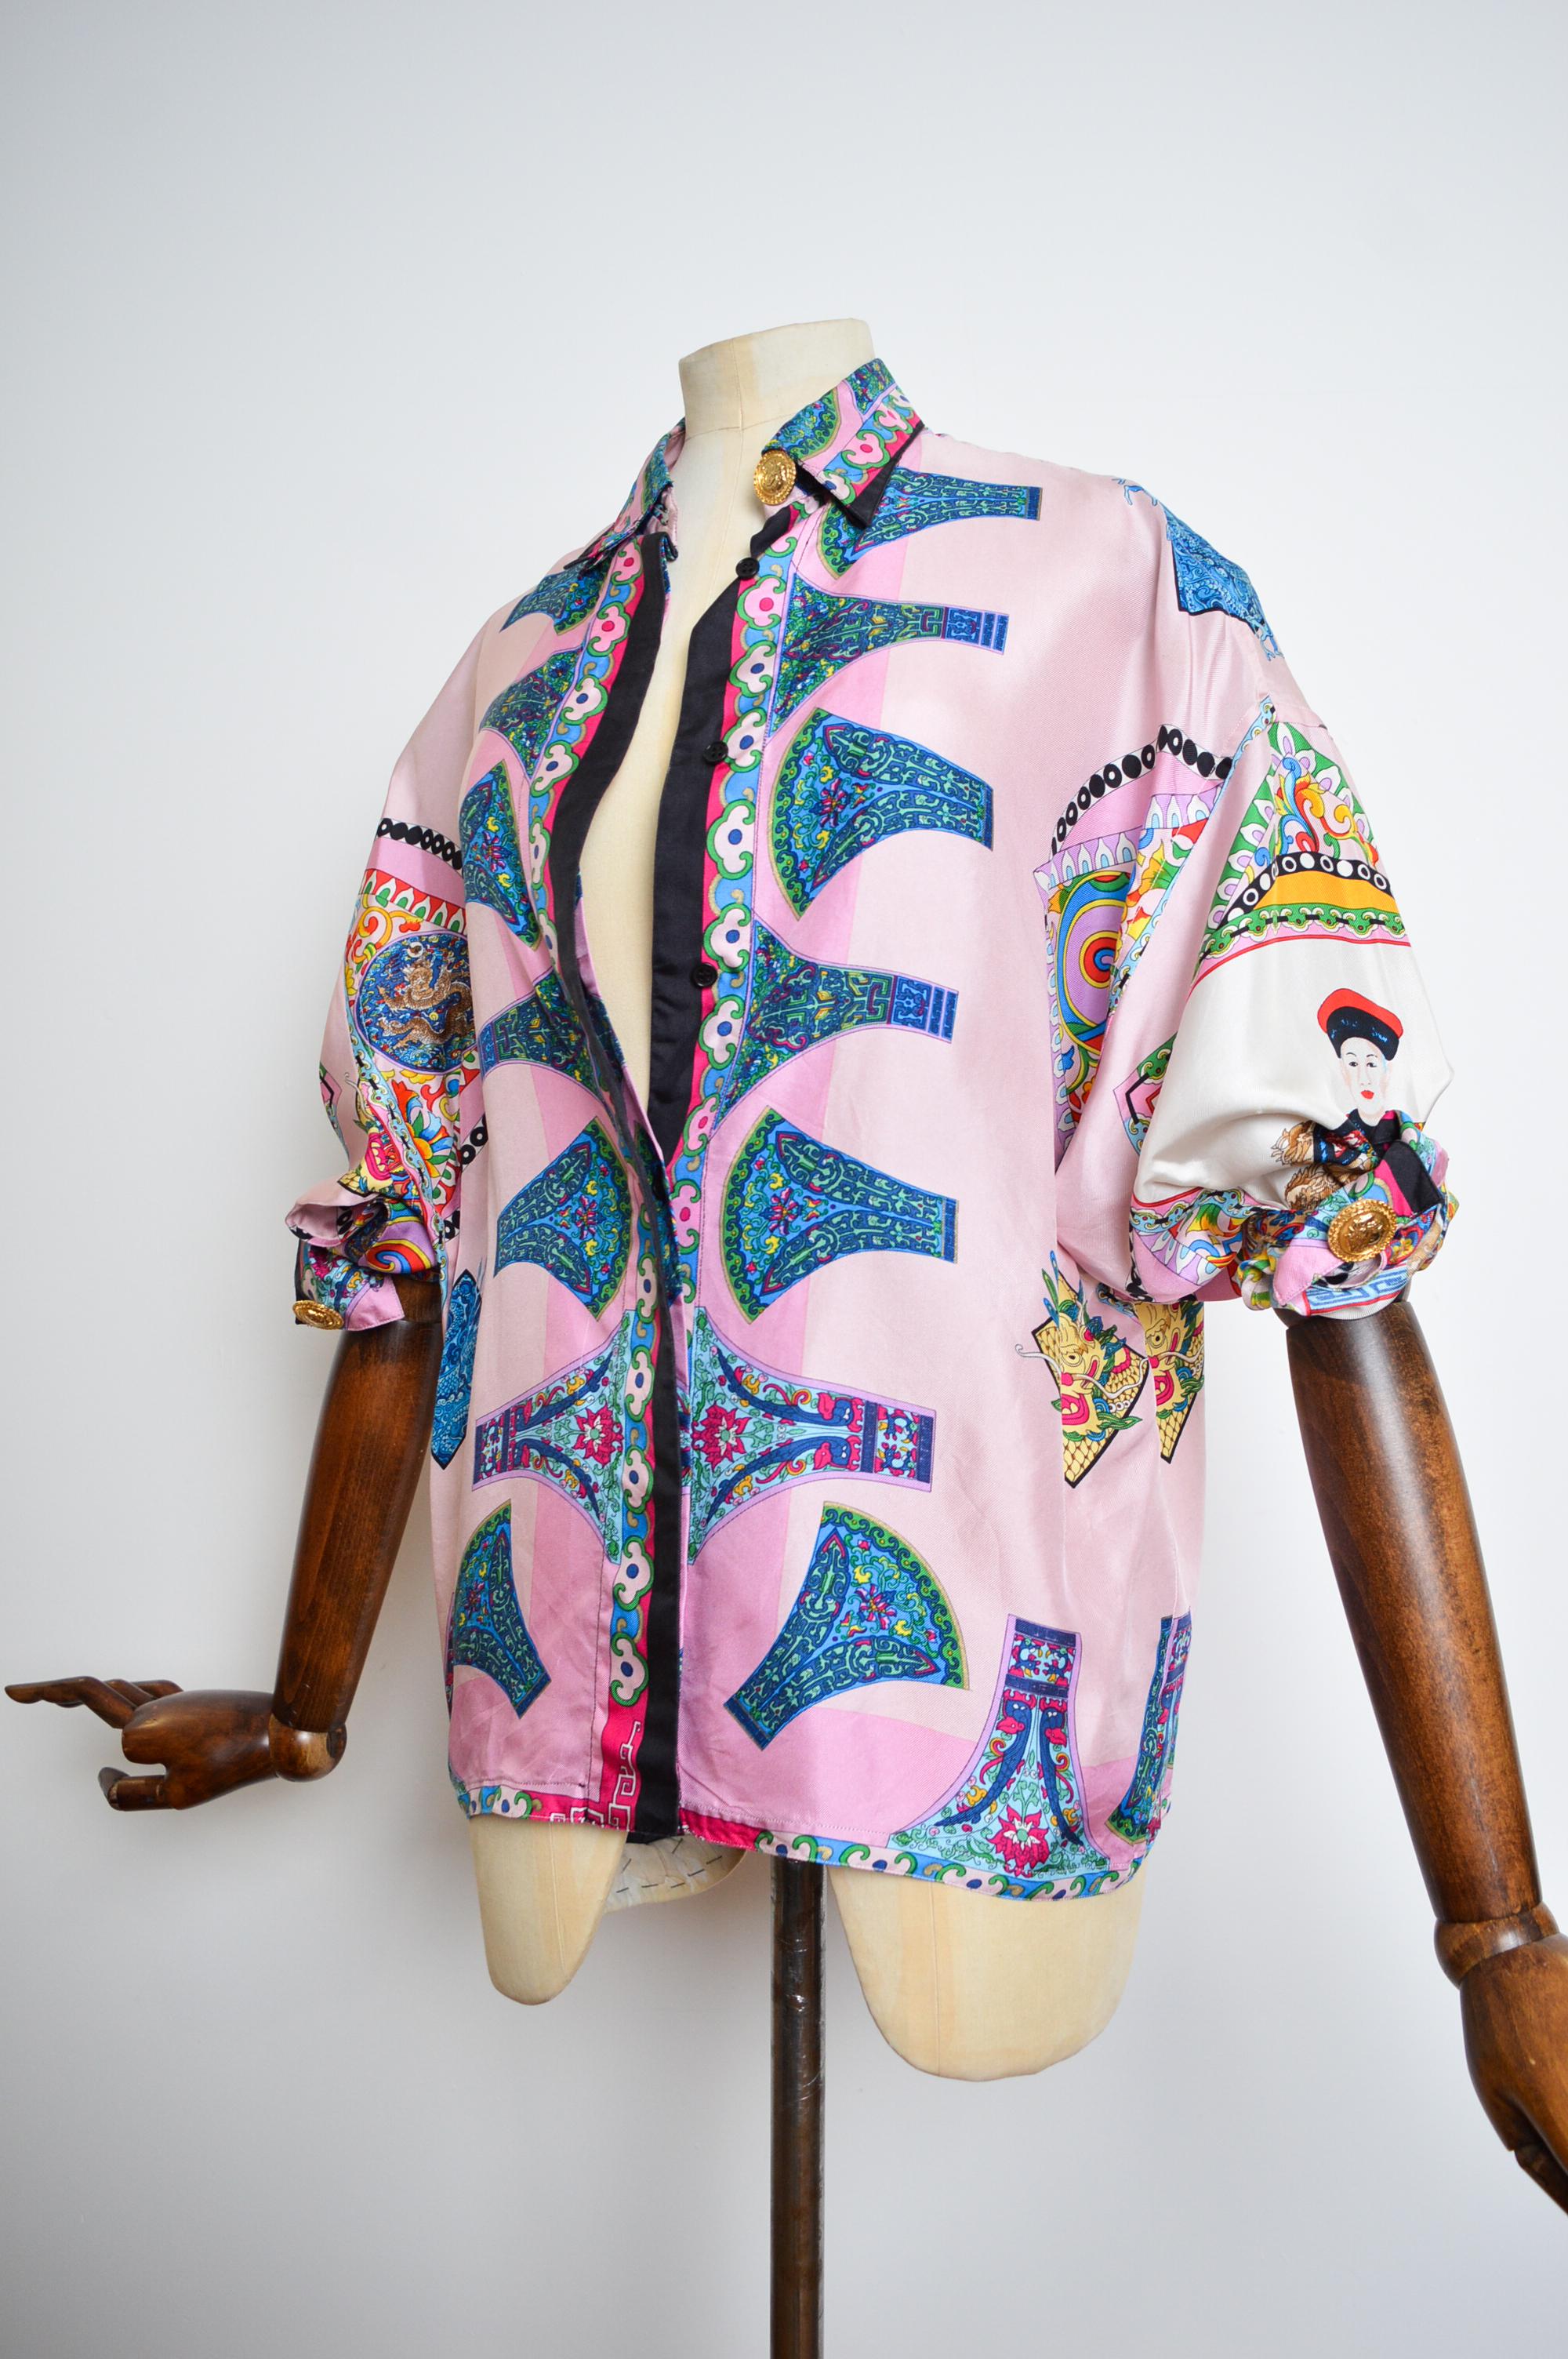 Gianni Versace 1993 Spring Runway Atelier Pure Silk patterned Colourful Shirt For Sale 12